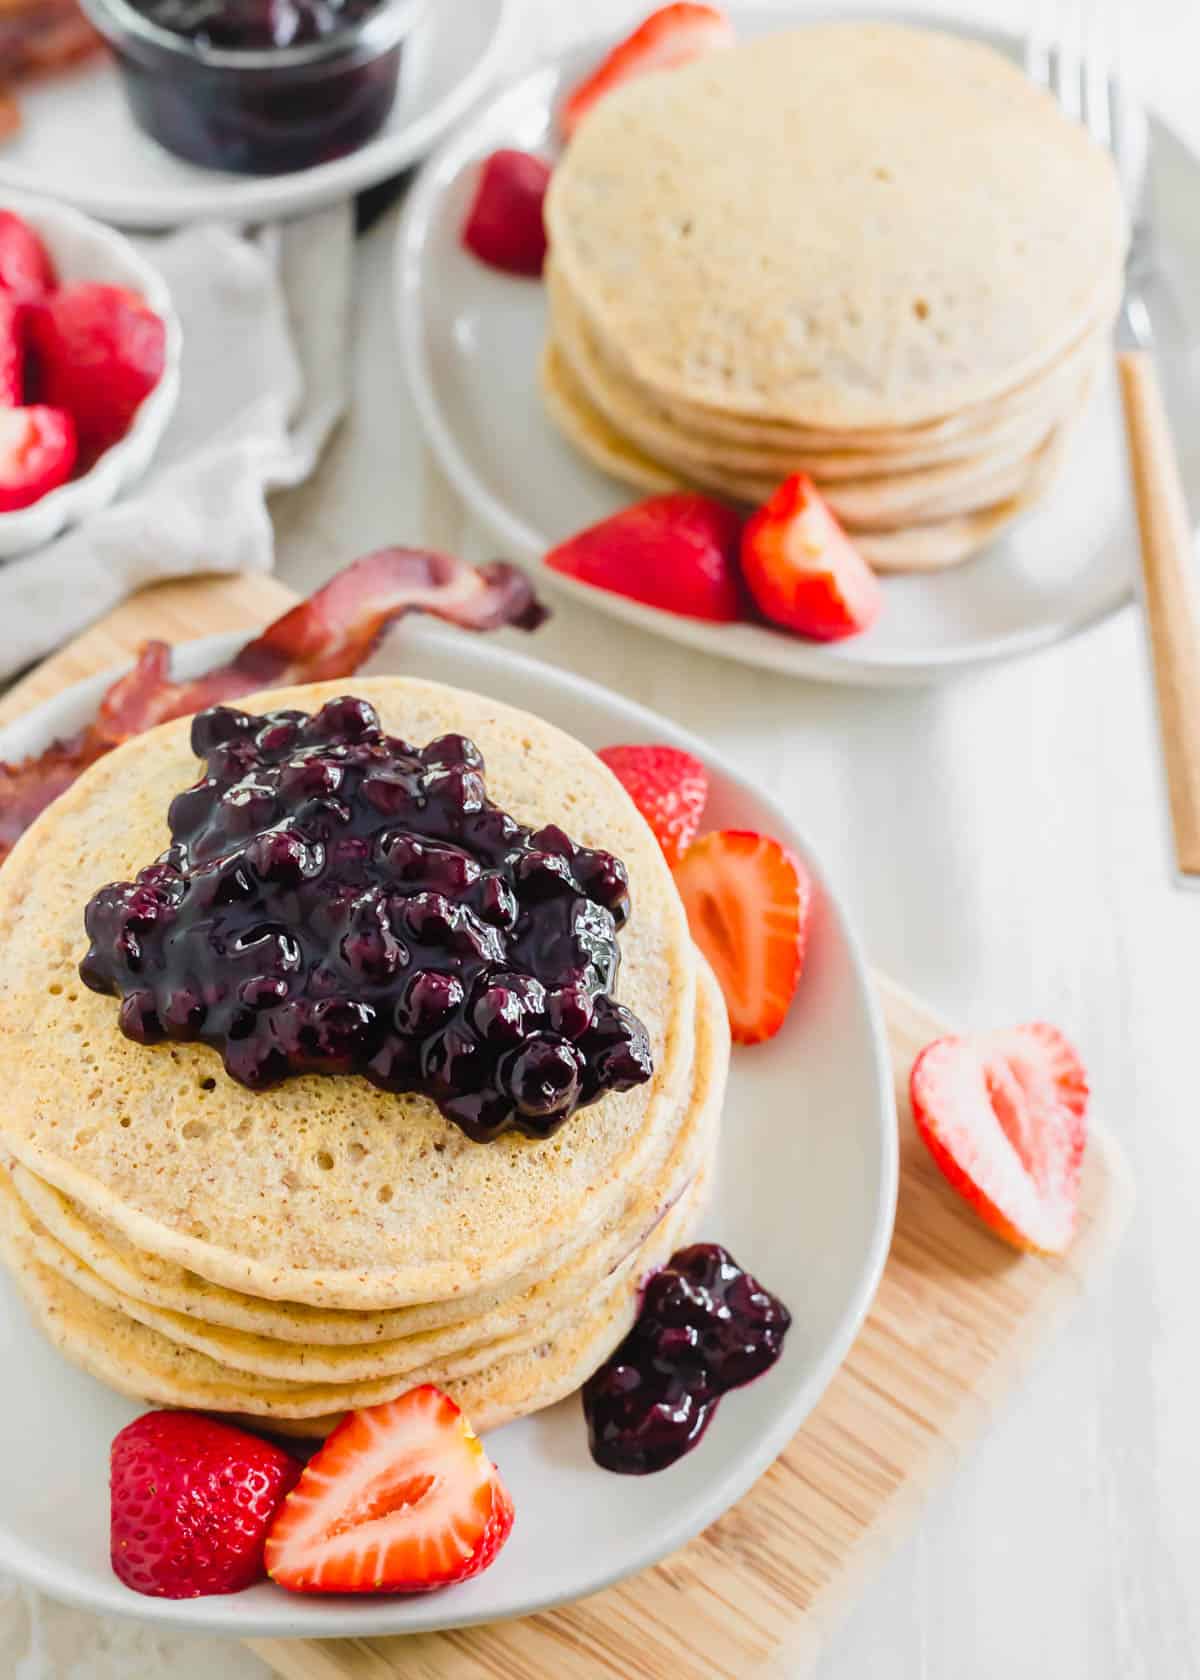 Gluten-free and vegan cassava flour pancakes with blueberry compote.